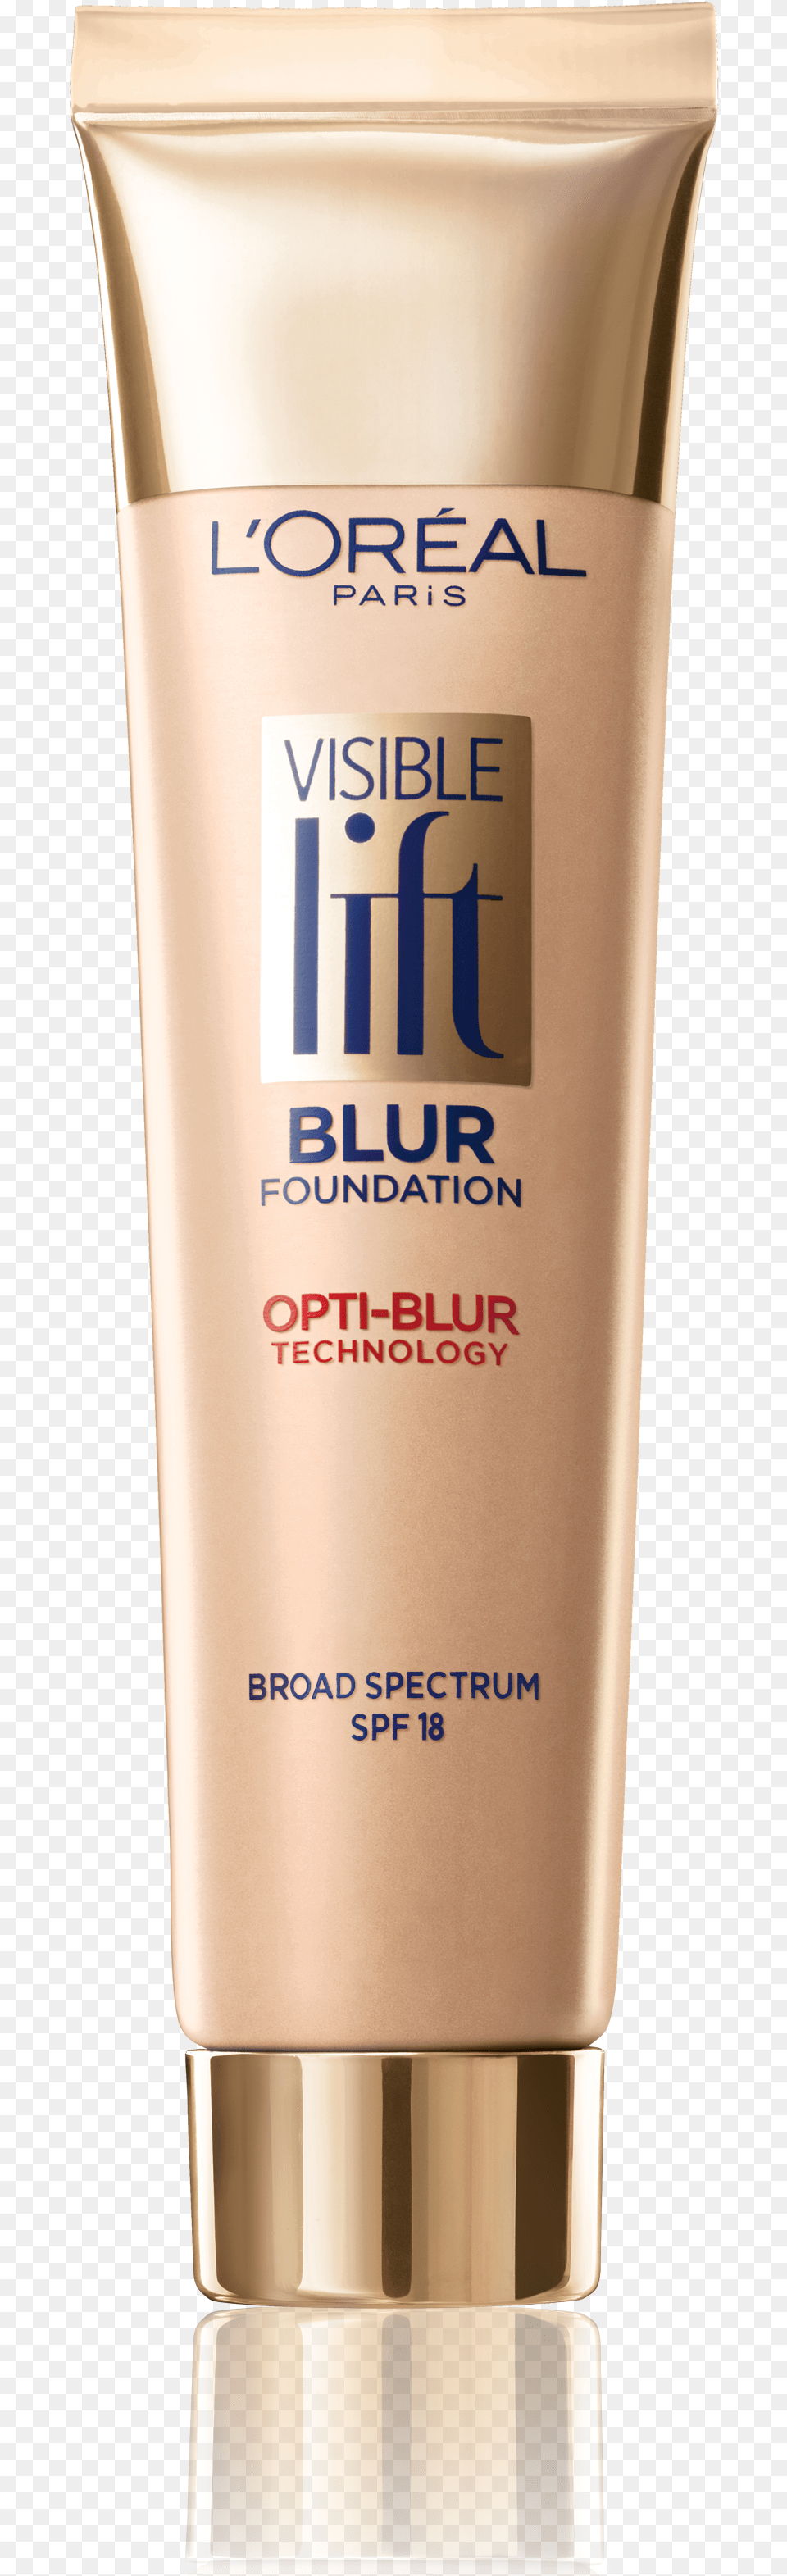 Images For Your Blog Post Base Visible Lift Blur Foundation Loreal Paris, Bottle, Lotion, Cosmetics, Shaker Free Transparent Png